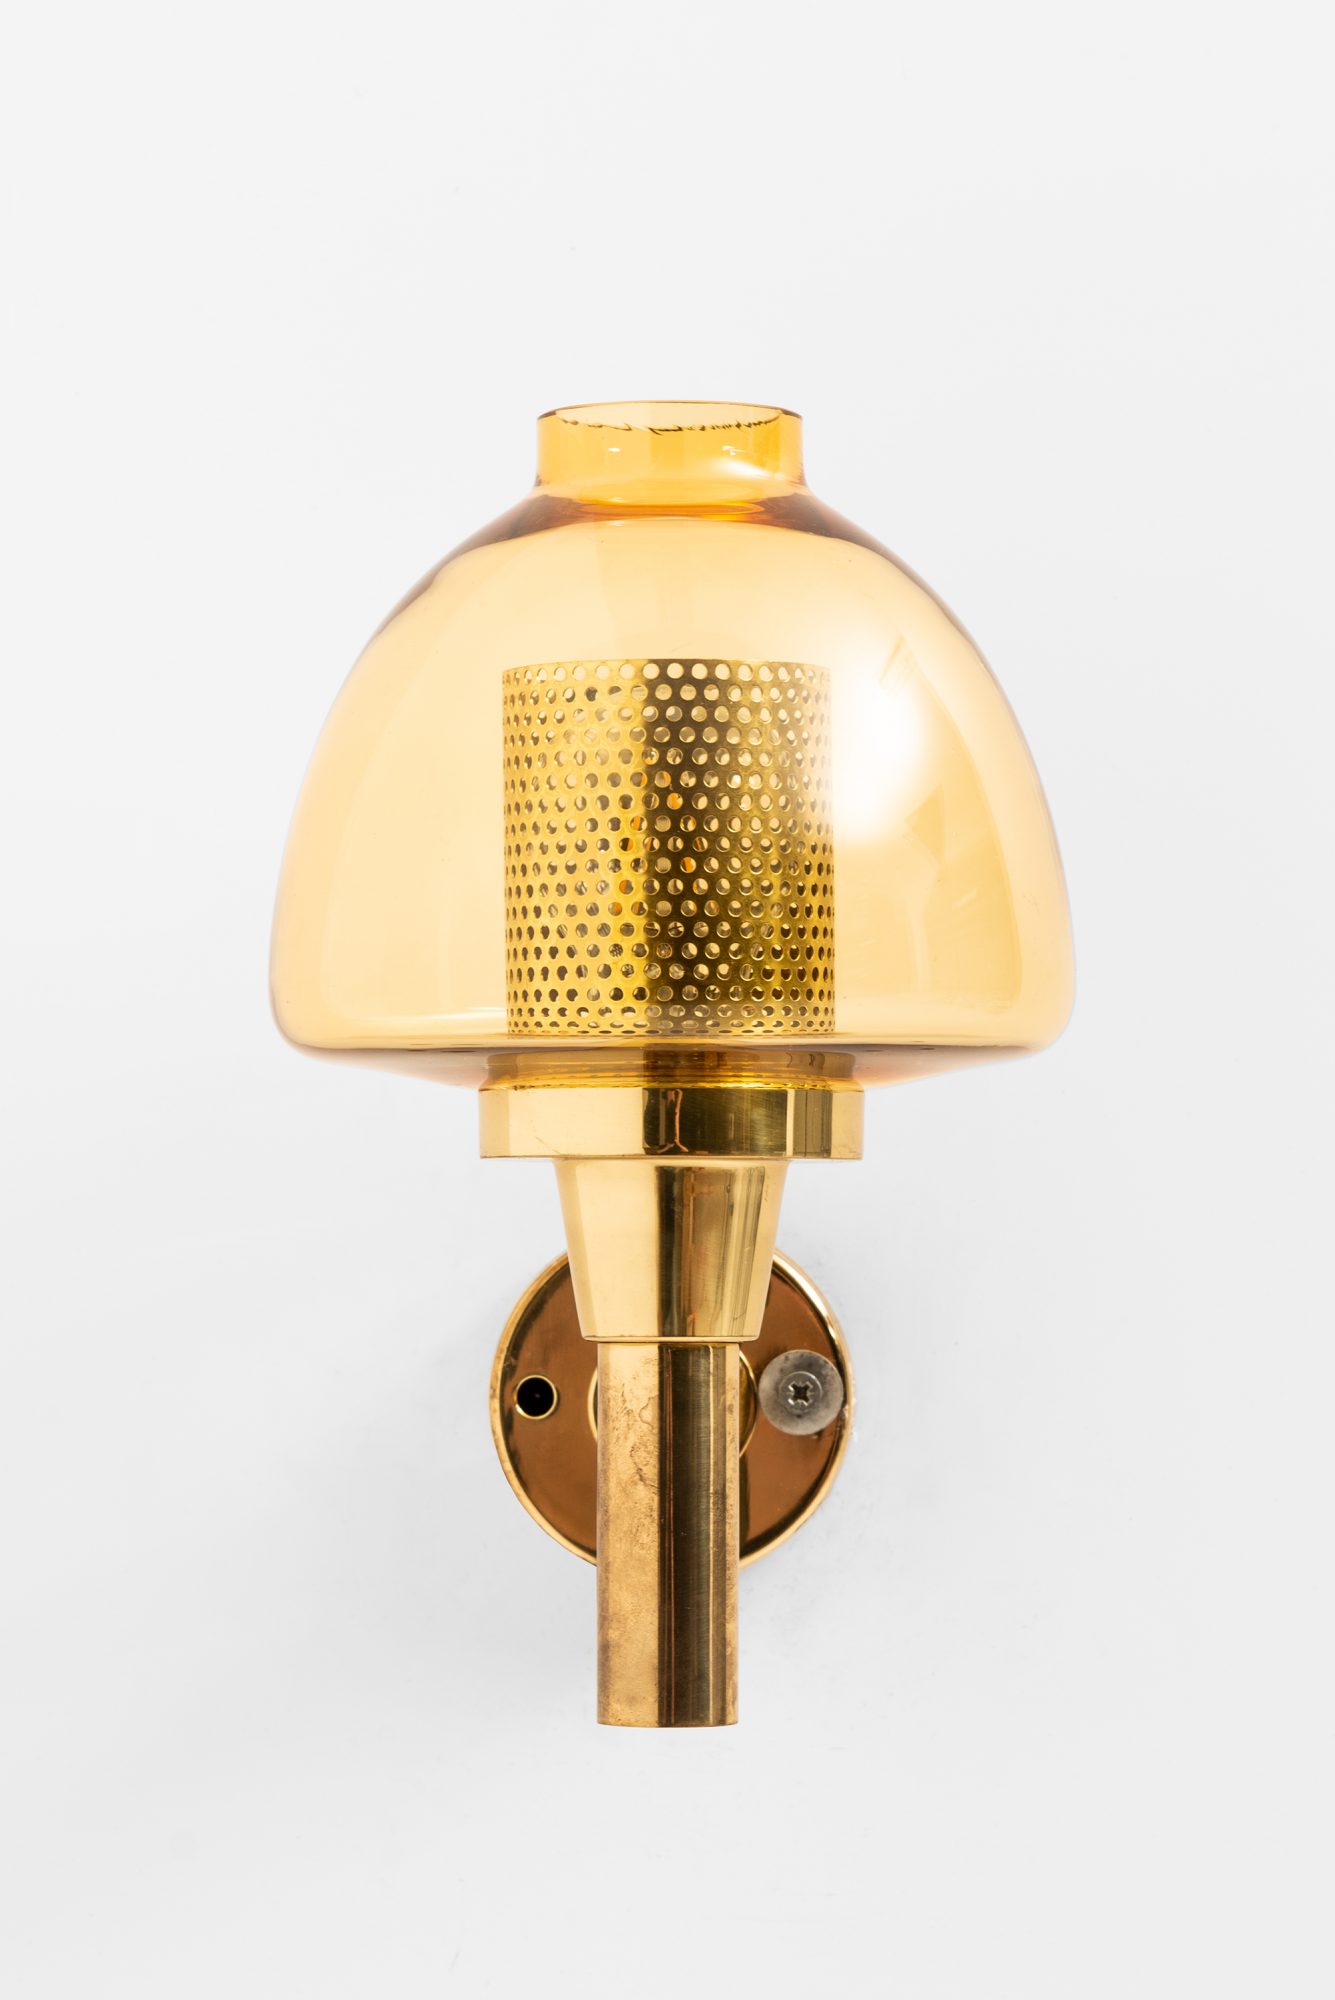 Hans-Agne Jakobsson wall lamps in brass and glass at Studio Schalling